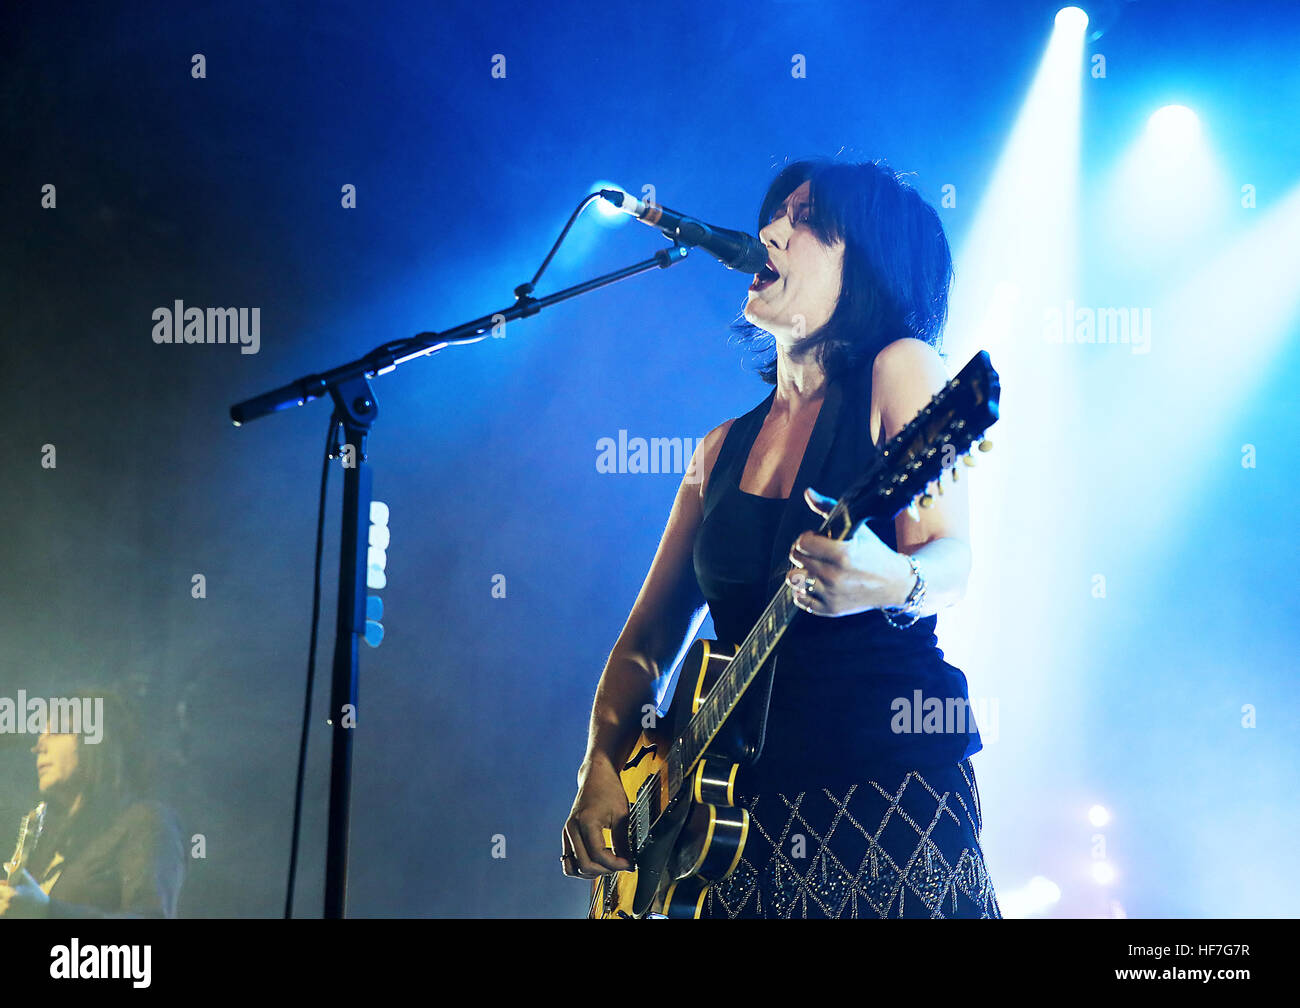 Lush Performing Their Last Ever Gig At Manchester Academy Featuring Lush Miki Berenyi Where Manchester United Kingdom When 25 Nov 16 Stock Photo Alamy